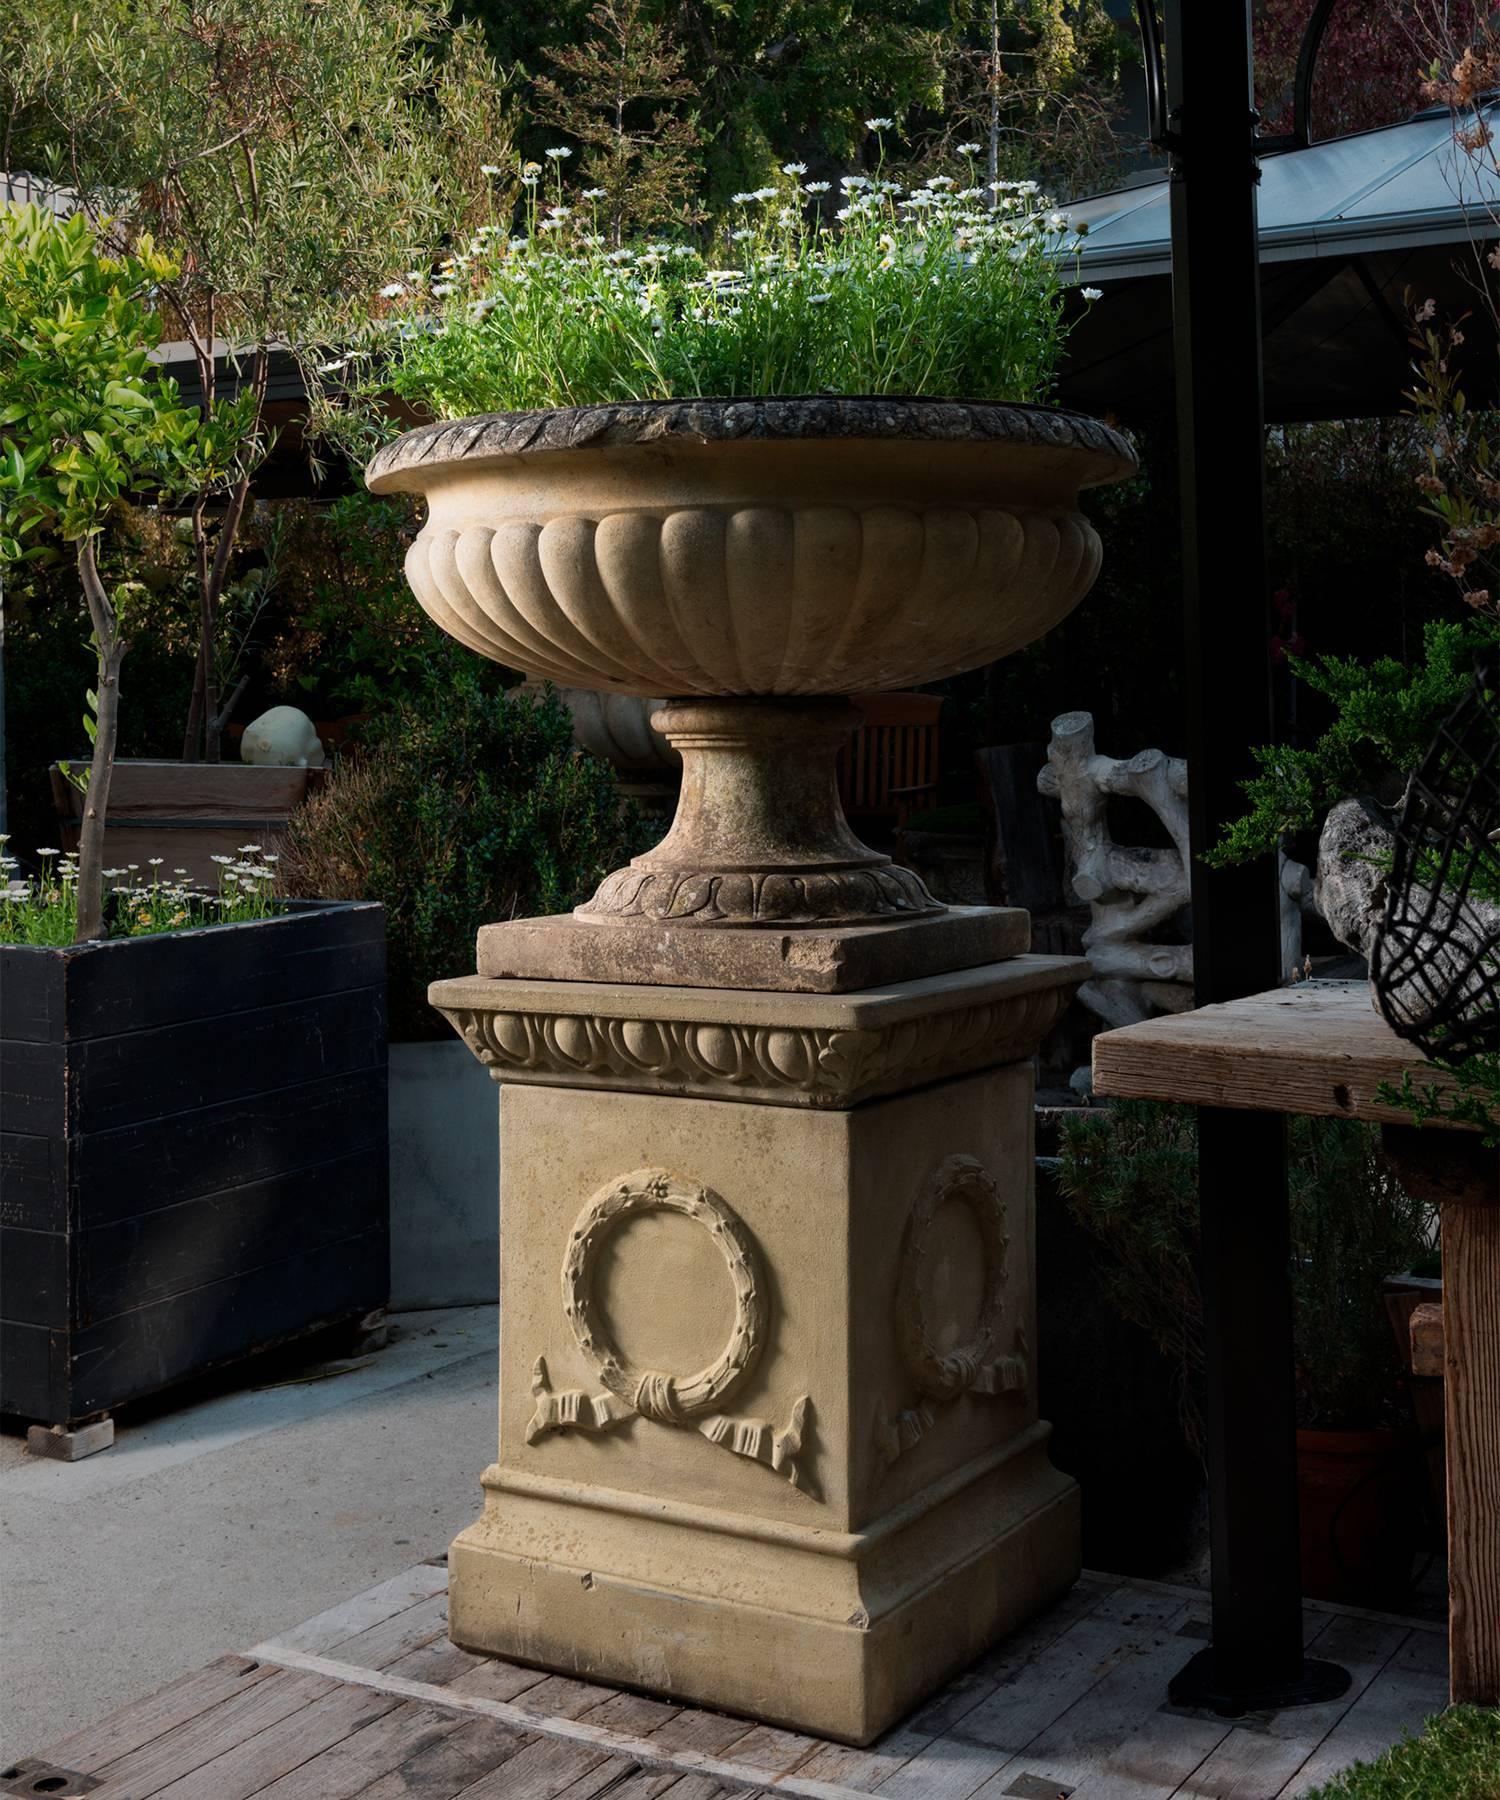 Cast stone composite urn with filigree details, wonderful to plant with Irish moss, England, circa 1970.